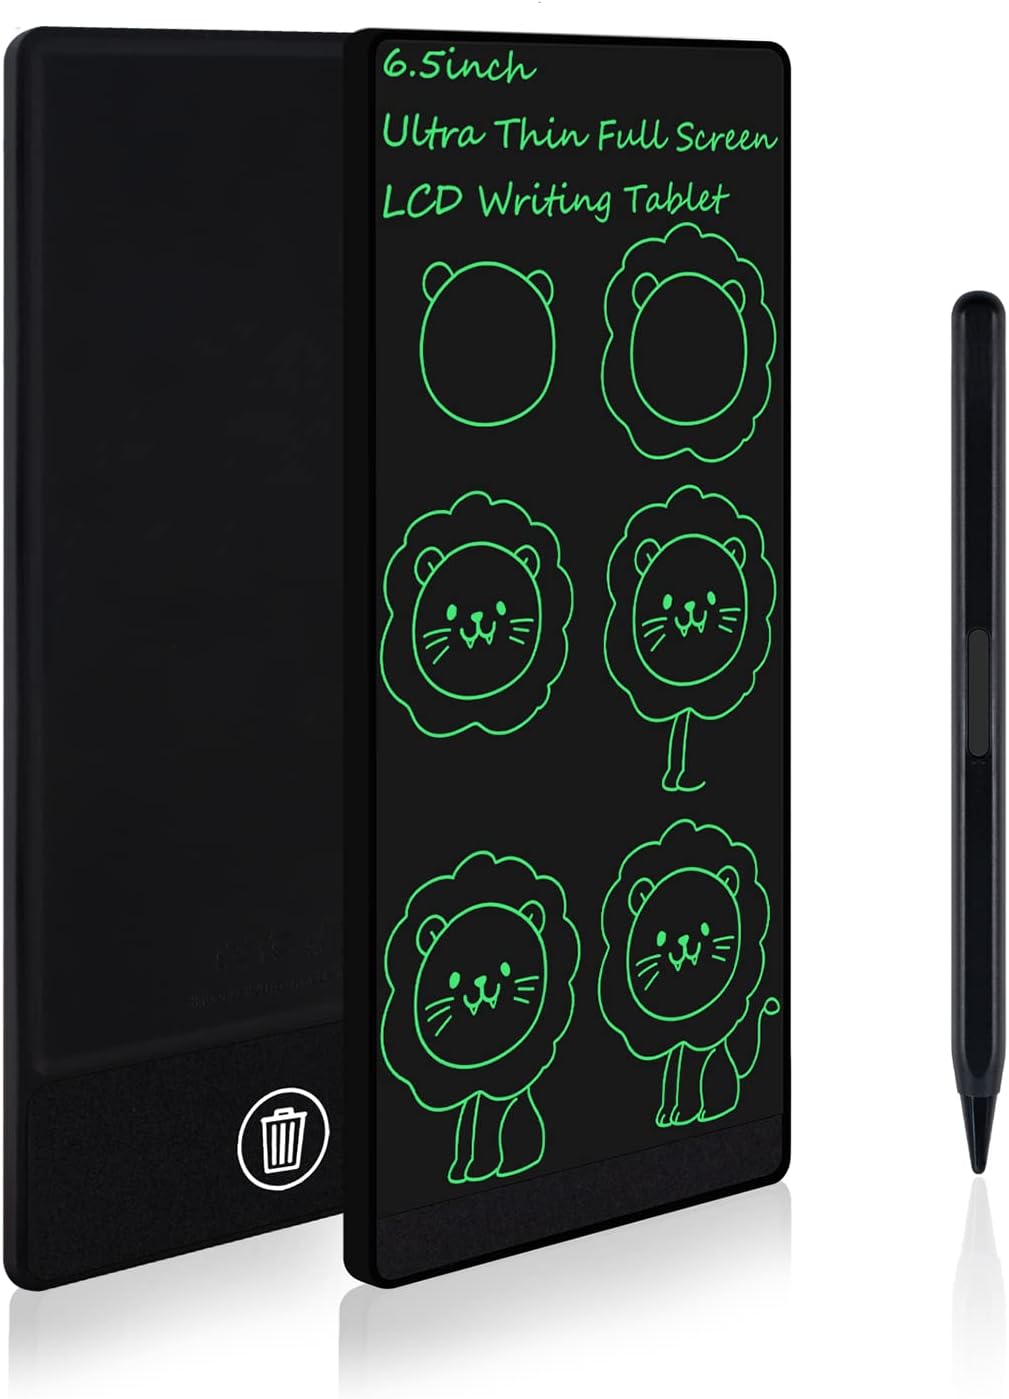 Amoretti Sonnet Mini LCD Writing Tablet, 6.5in [...]